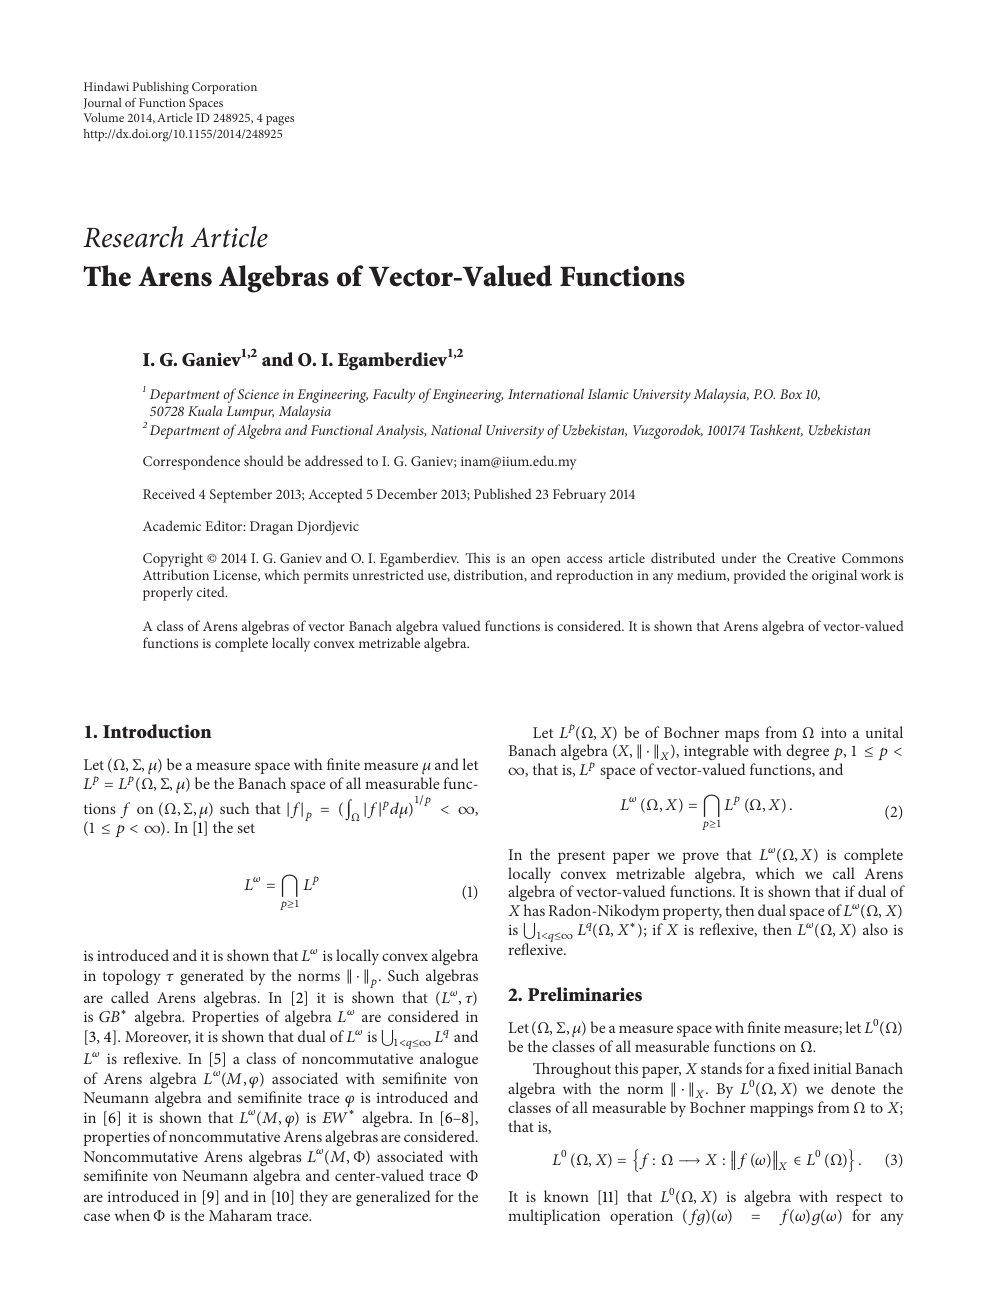 The Arens Algebras Of Vector Valued Functions Topic Of Research Paper In Mathematics Download Scholarly Article Pdf And Read For Free On Cyberleninka Open Science Hub